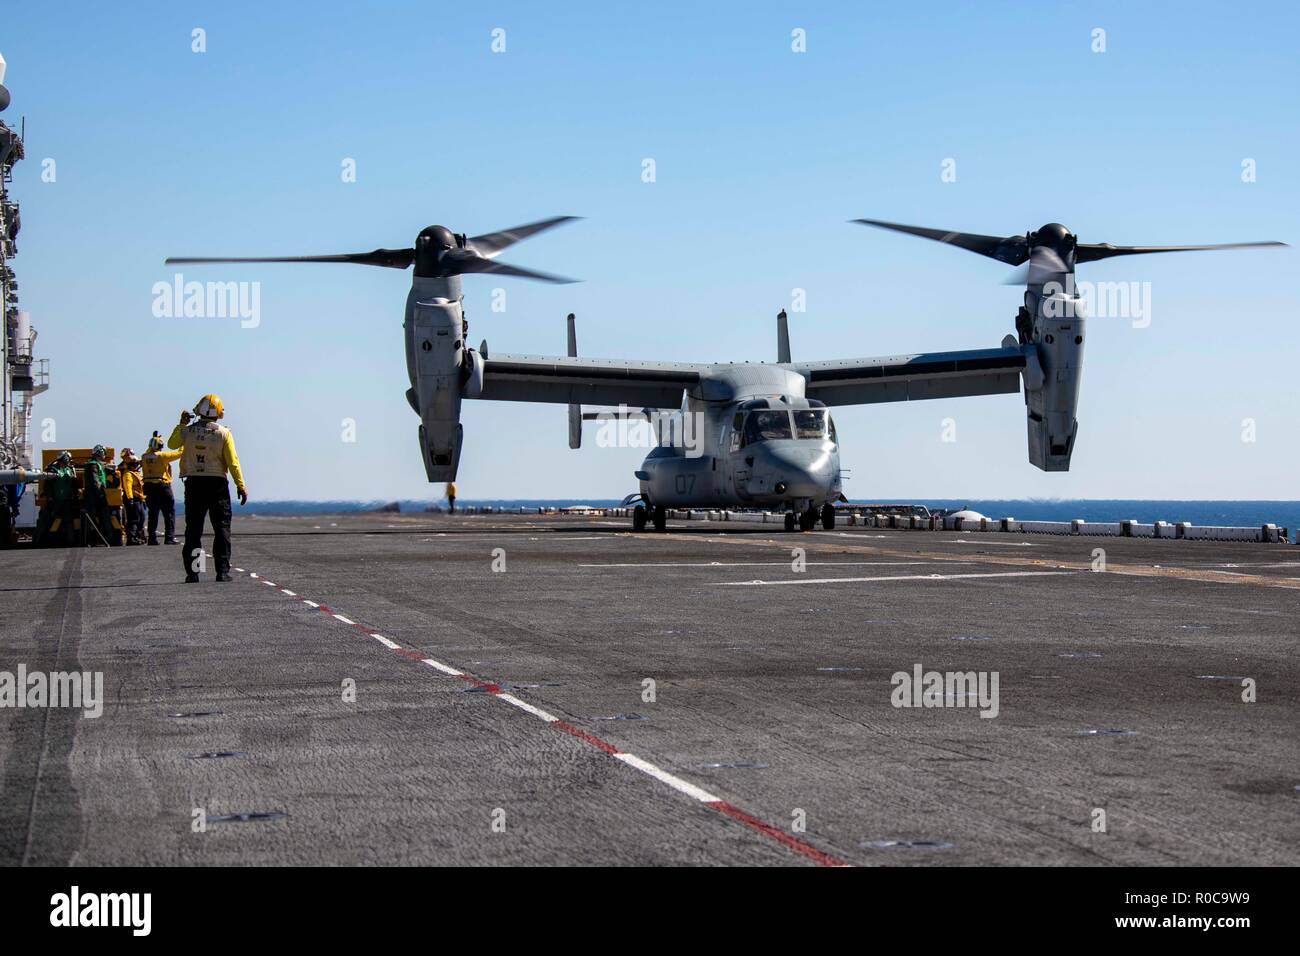 181029-N-KW492-0164 ATLANTIC OCEAN (Oct. 29, 2018) An MV-22 Osprey prepares to take off from the flight deck of the Wasp-class amphibious assault ship USS Kearsarge (LHD3) during the Carrier Strike Group (CSG) 4 composite training unit exercise (COMPTUEX). COMPTUEX is the final pre-deployment exercise that certifies the combined Kearsarge Amphibious Ready Group's and 22nd Marine Expeditionary Unit's abilities to conduct military operations at sea and project power ashore through joint planning and execution of challenging and realistic training scenarios. CSG 4 mentors, trains and assesses Eas Stock Photo